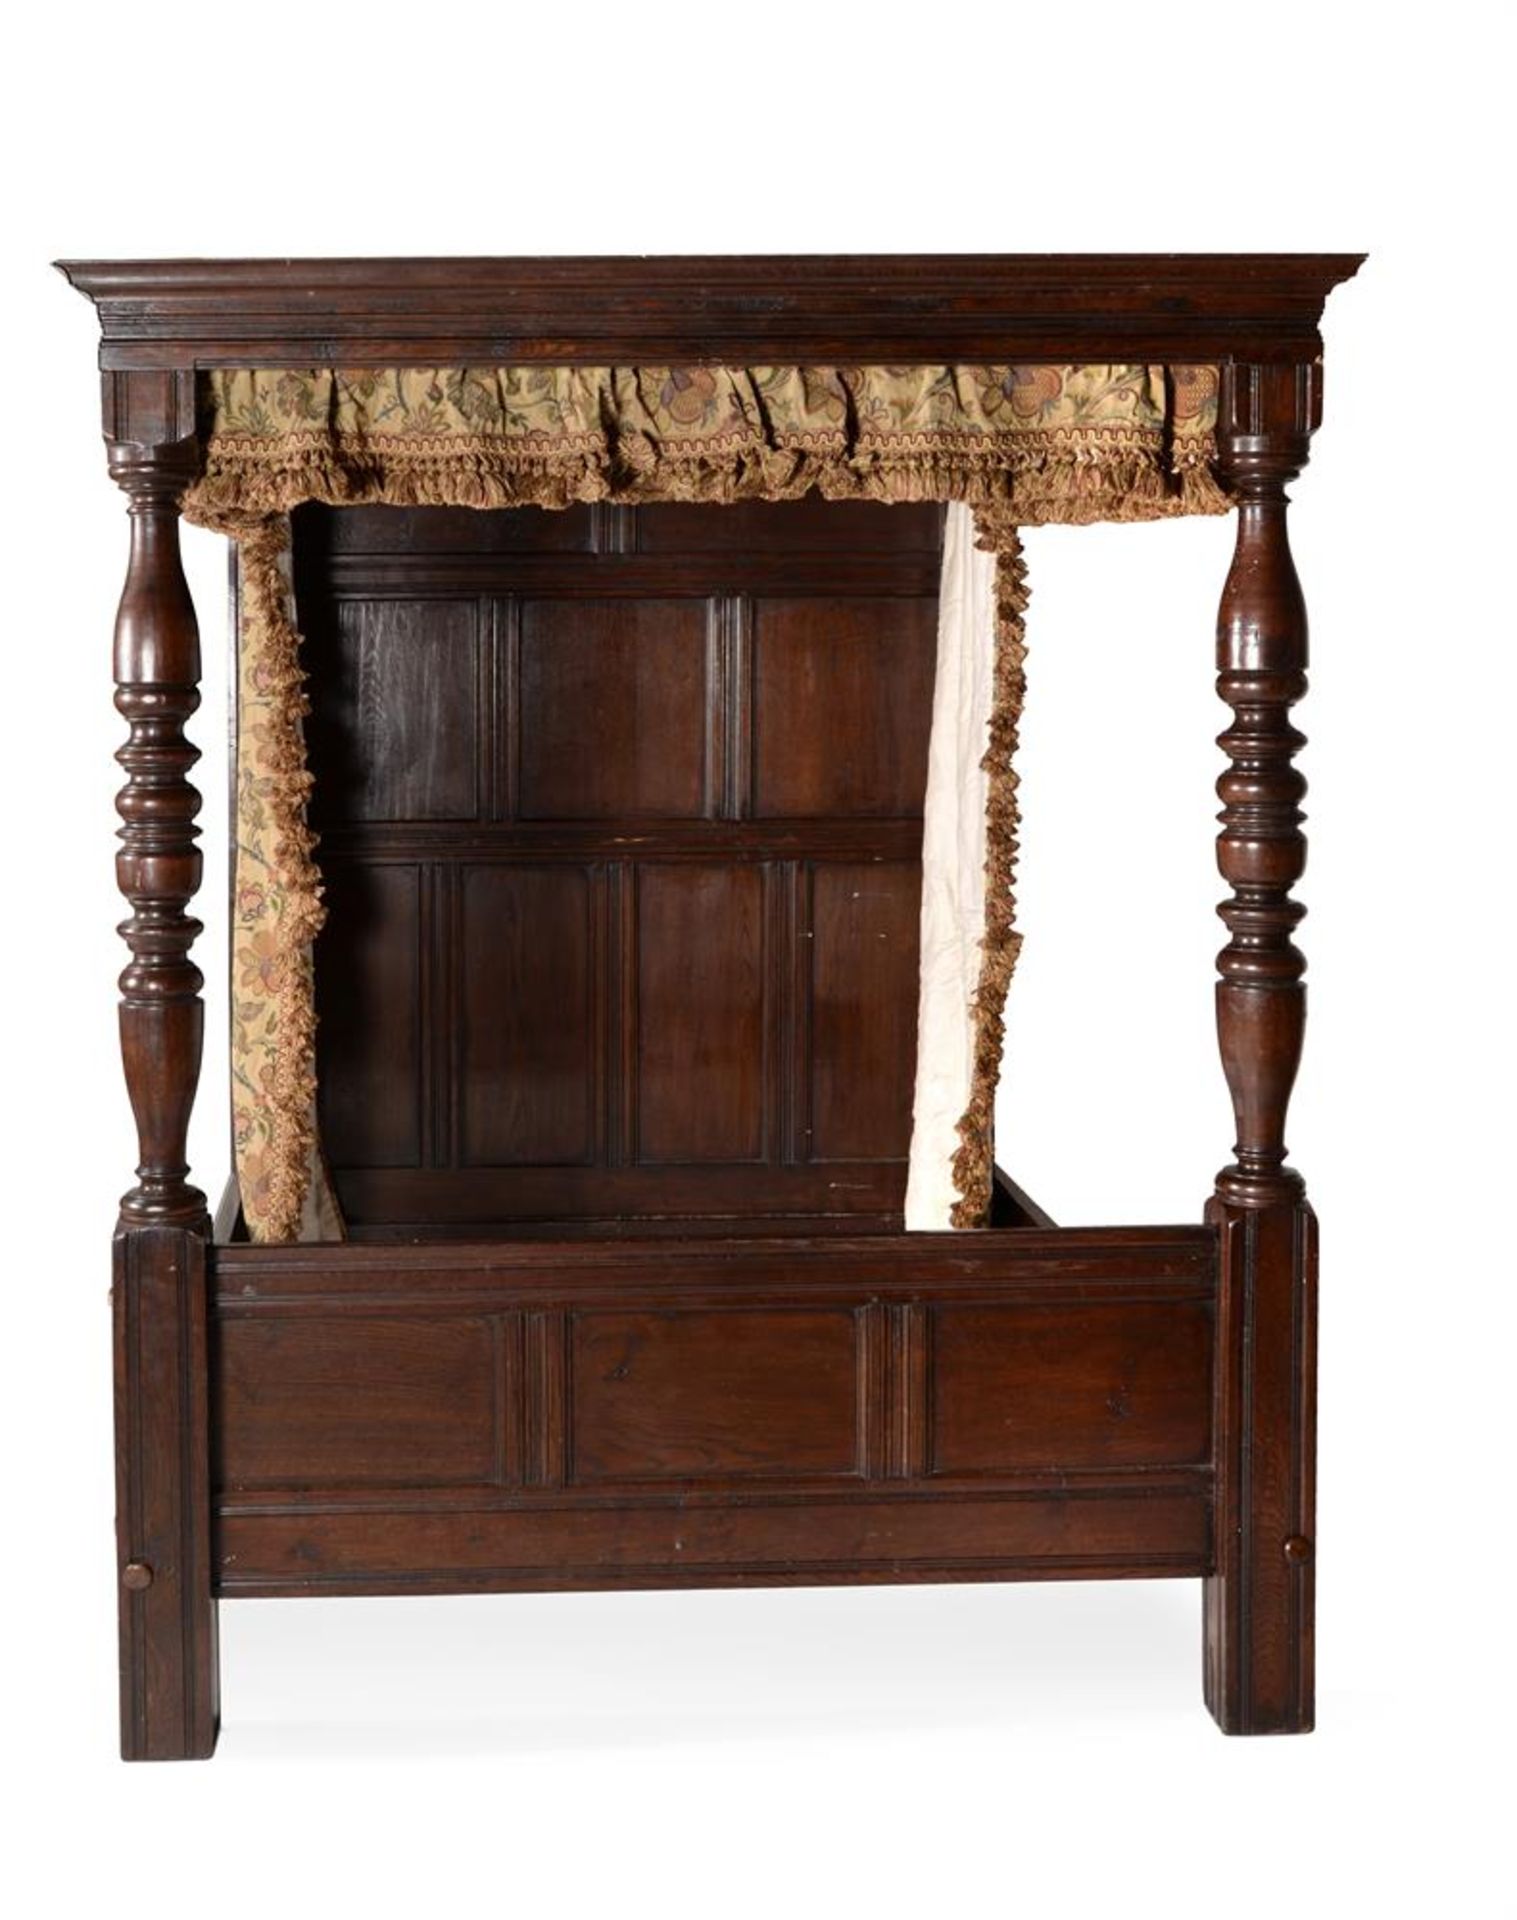 AN OAK FOUR POST BED, IN THE STUART MANNER, COMPLETE WITH HANGINGS, IN 17TH CENTURY STYLE - Image 3 of 9